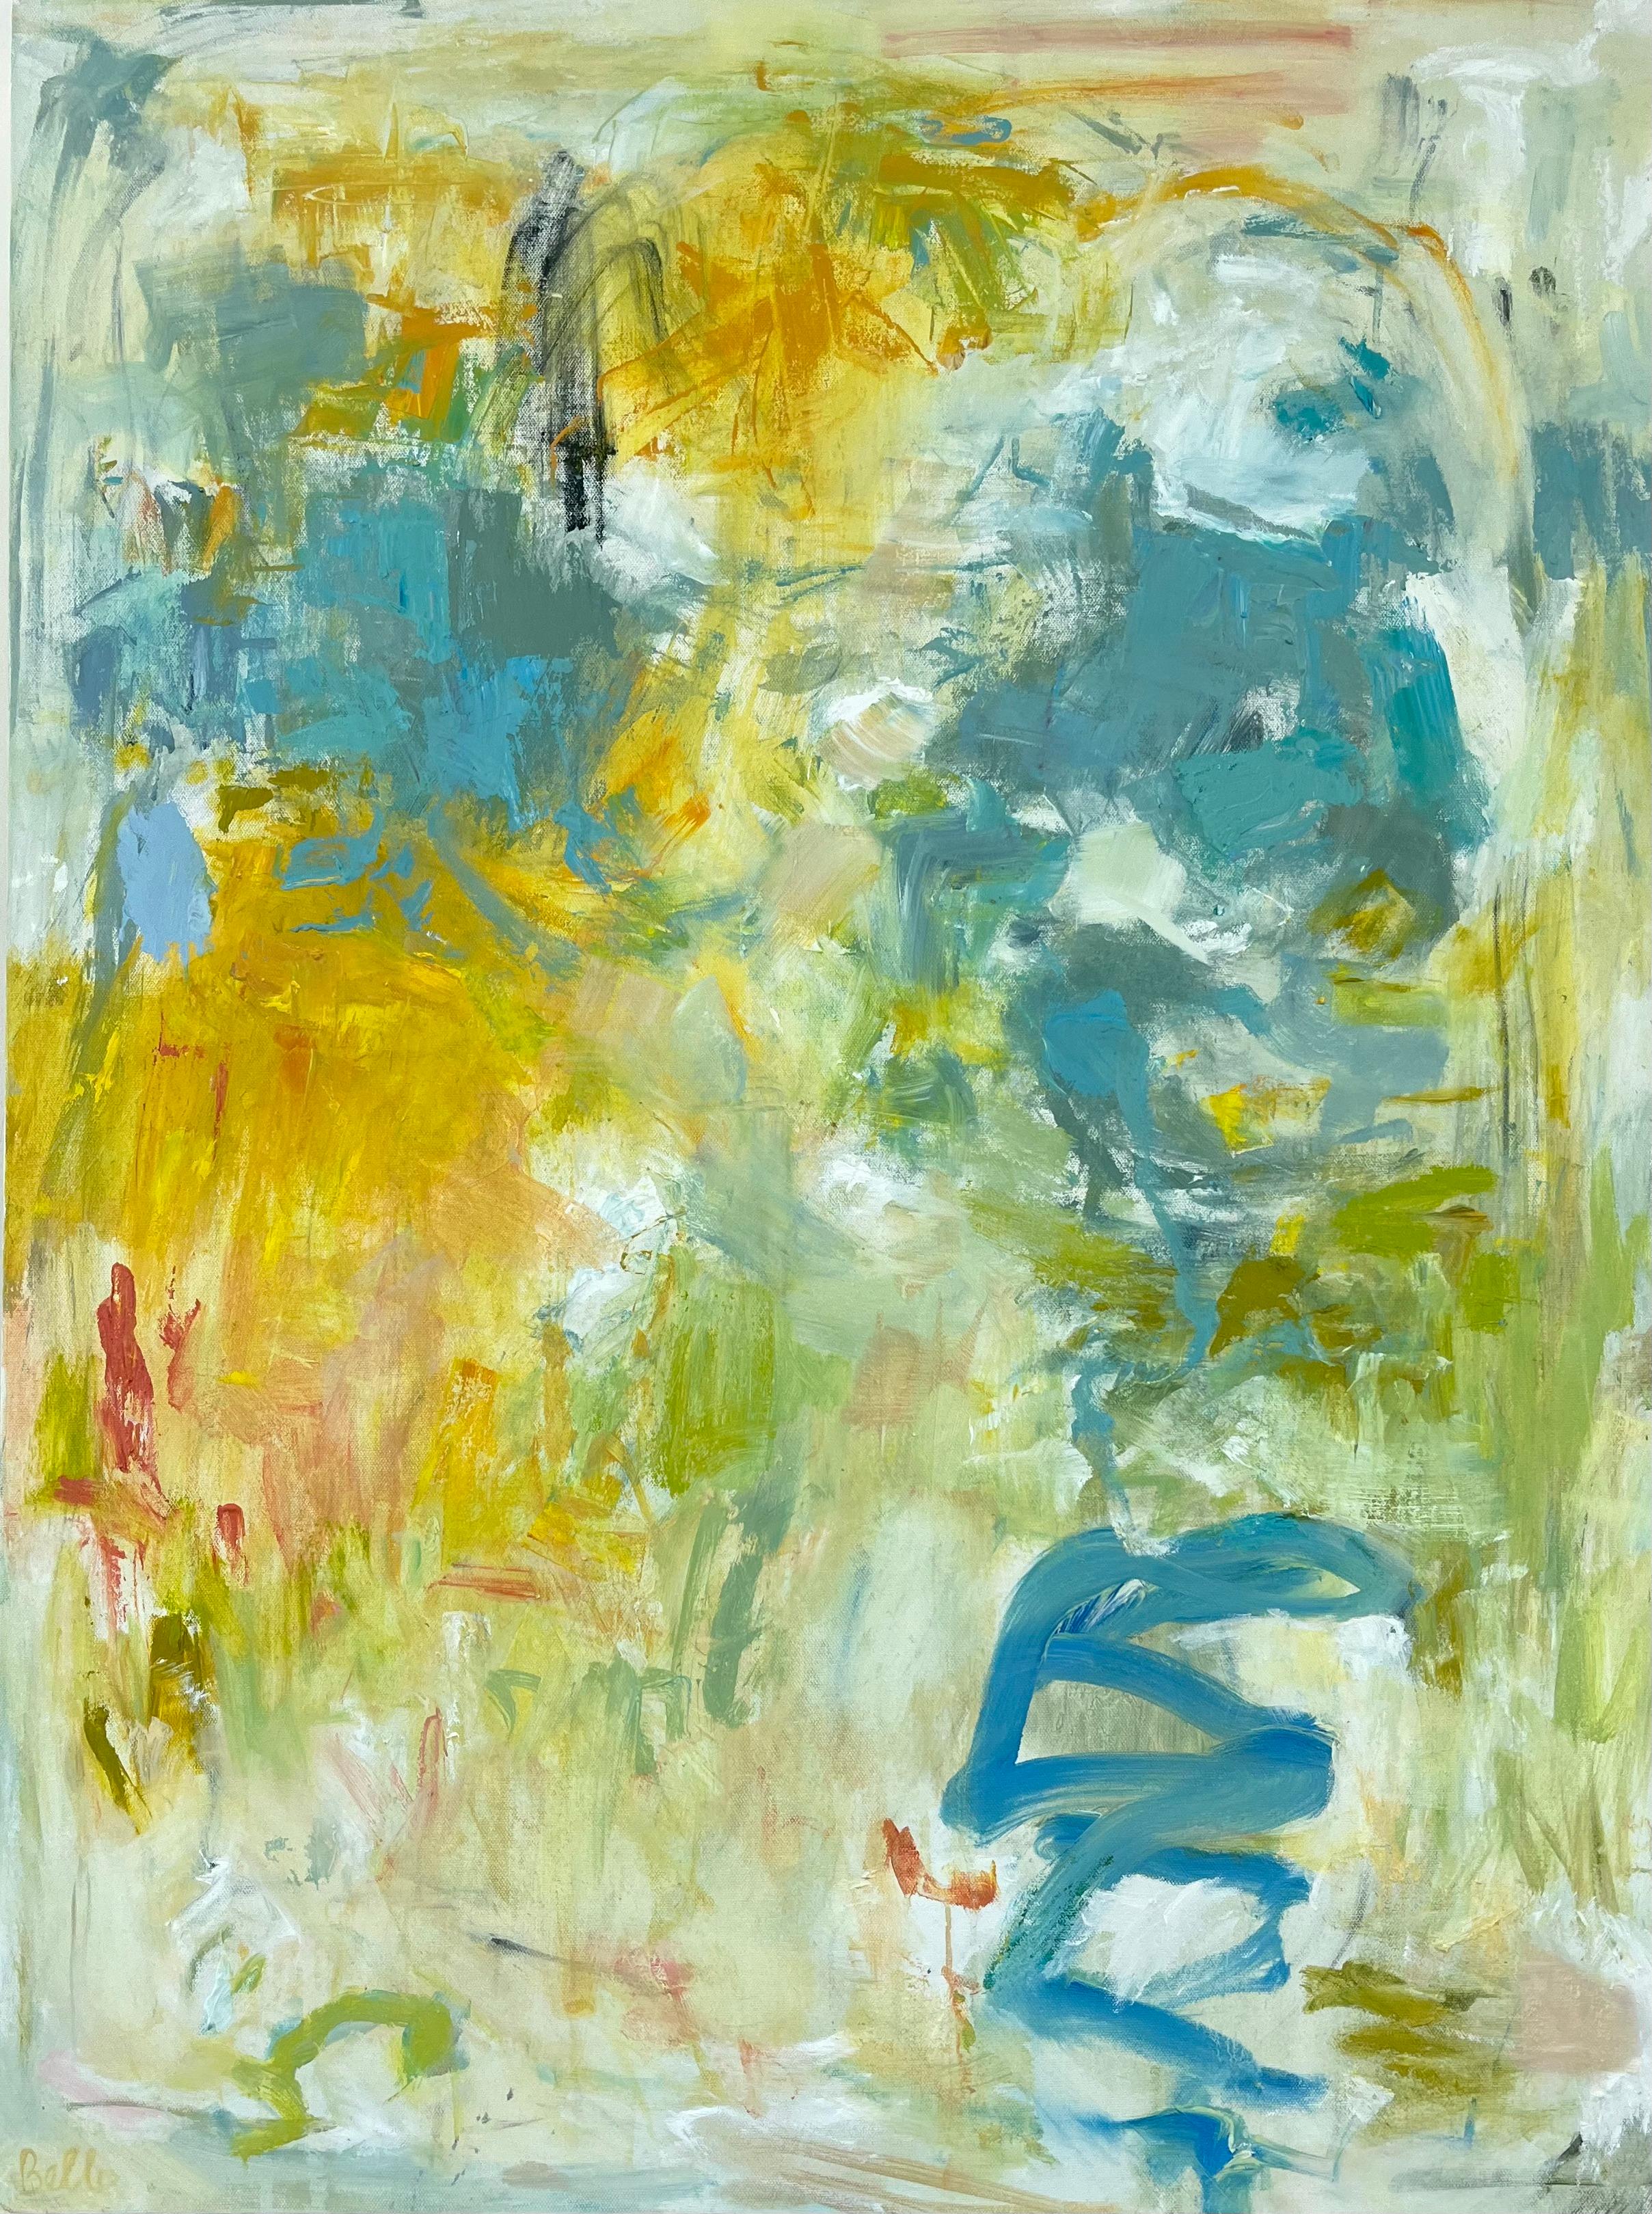 Is That So (Abstract, Expressionism, Warm, Lively, Green, Teal, Yellow, 20% OFF) - Painting by Katherine Bello